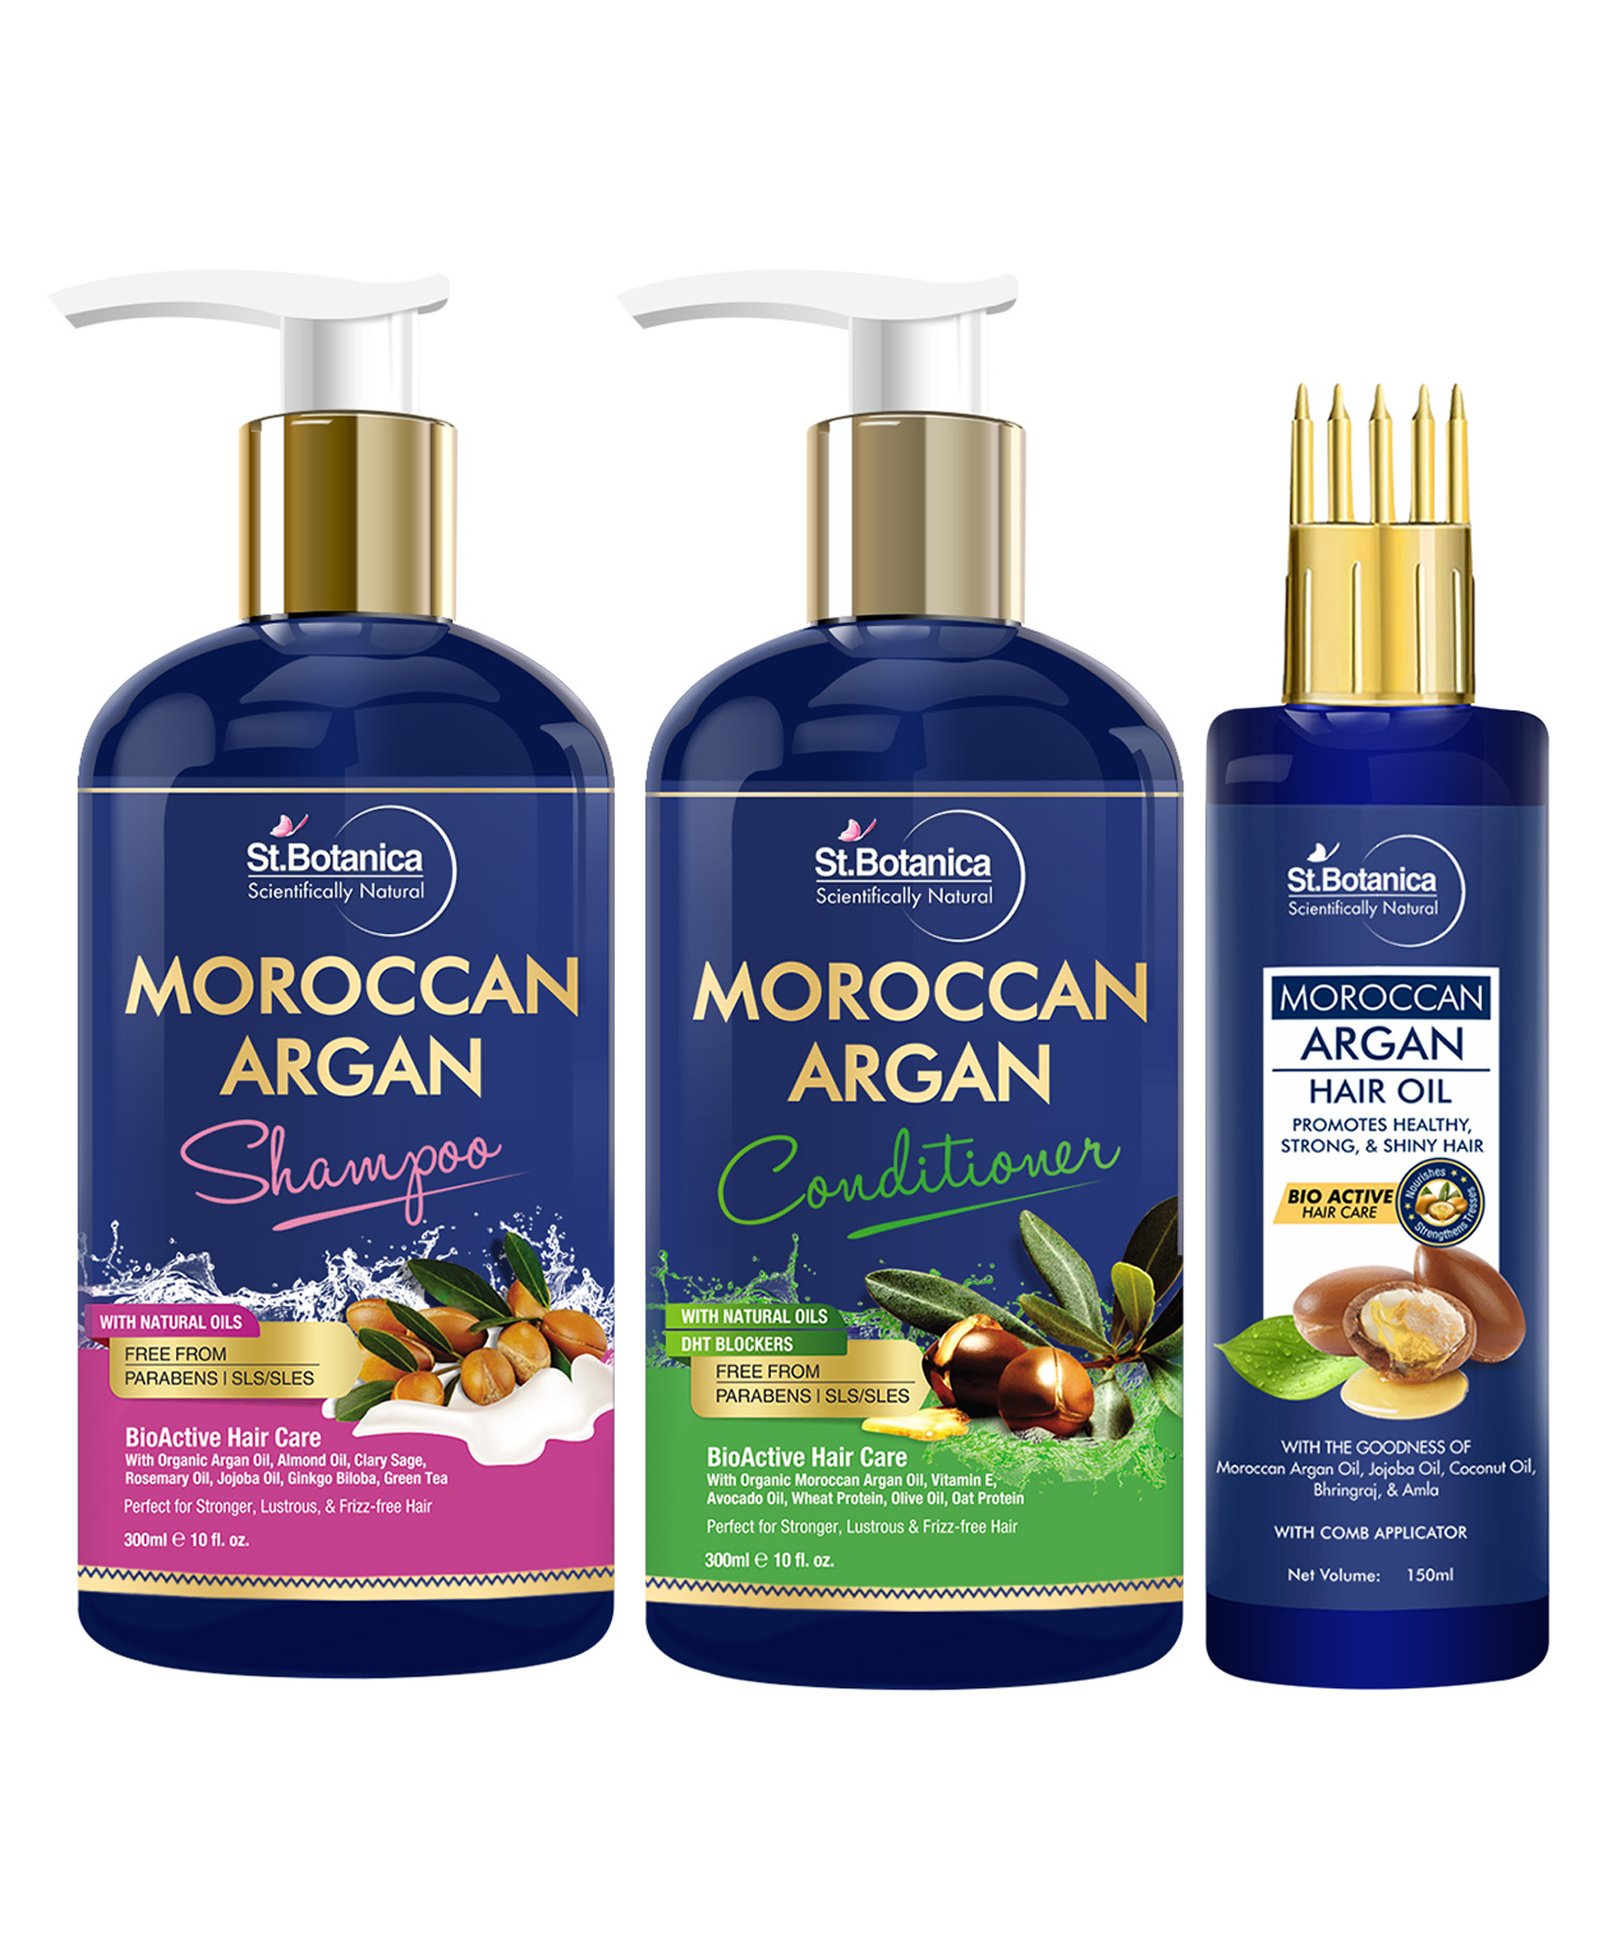  Moroccan Argan Shampoo Conditioner And Hair Oil With Applicator  - 300 ml, 150 ml Online in India, Buy at Best Price from  -  8699633